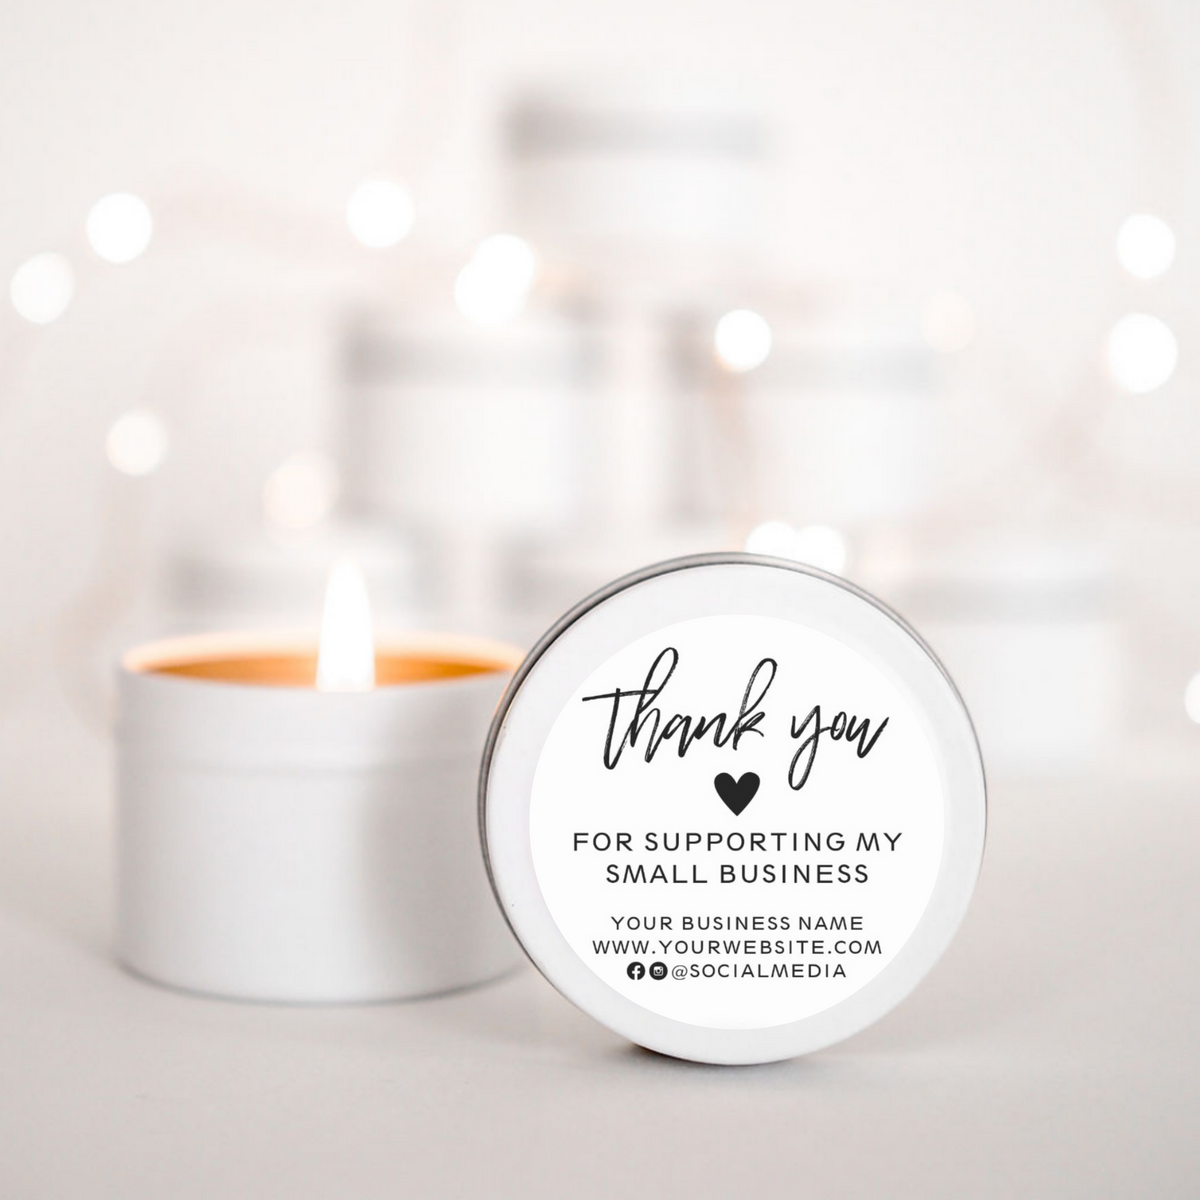 Corporate Thank you candles | Business Branding with Personalise Message